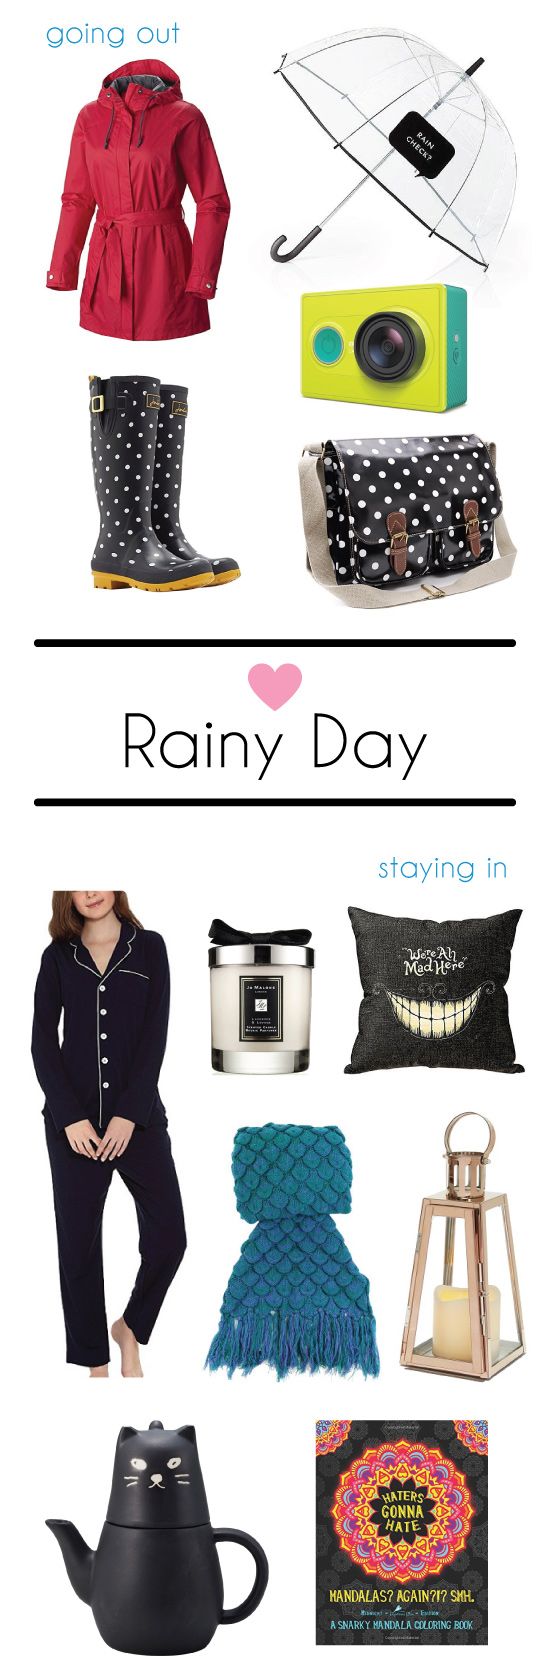 Rainy day outfit for outdoor and indoor | Rainy Day must have accessories #rain ...